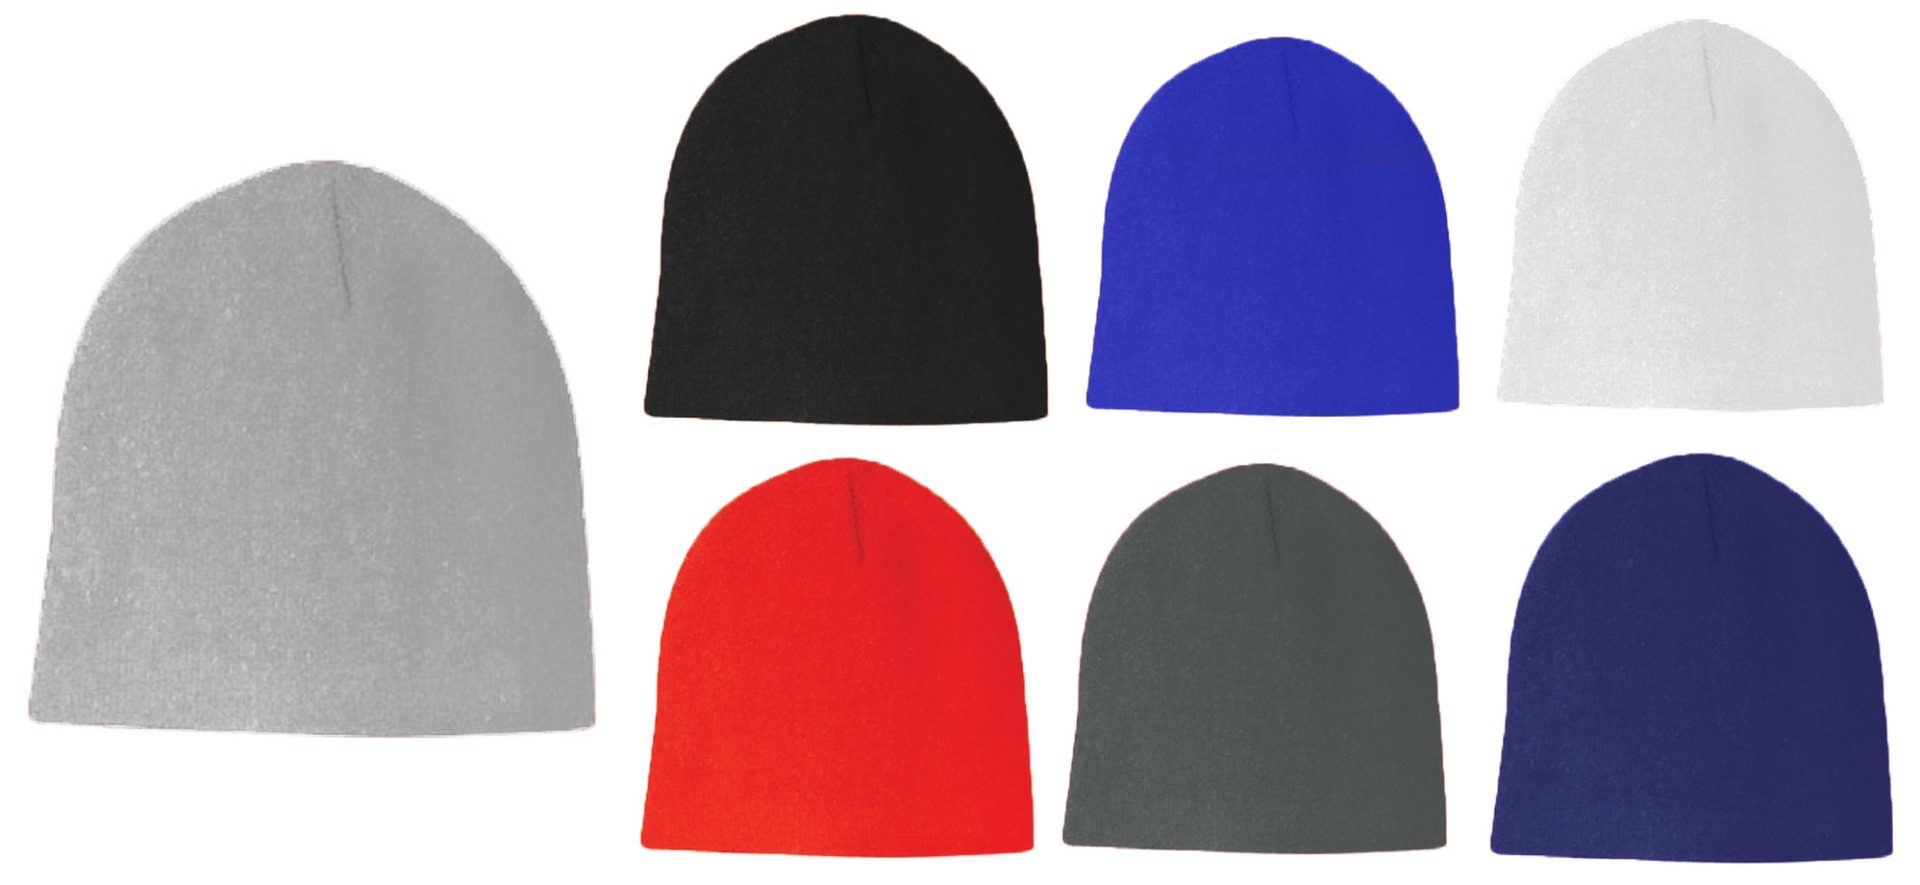 Adult Beanie HATs - Choose Your Color(s)